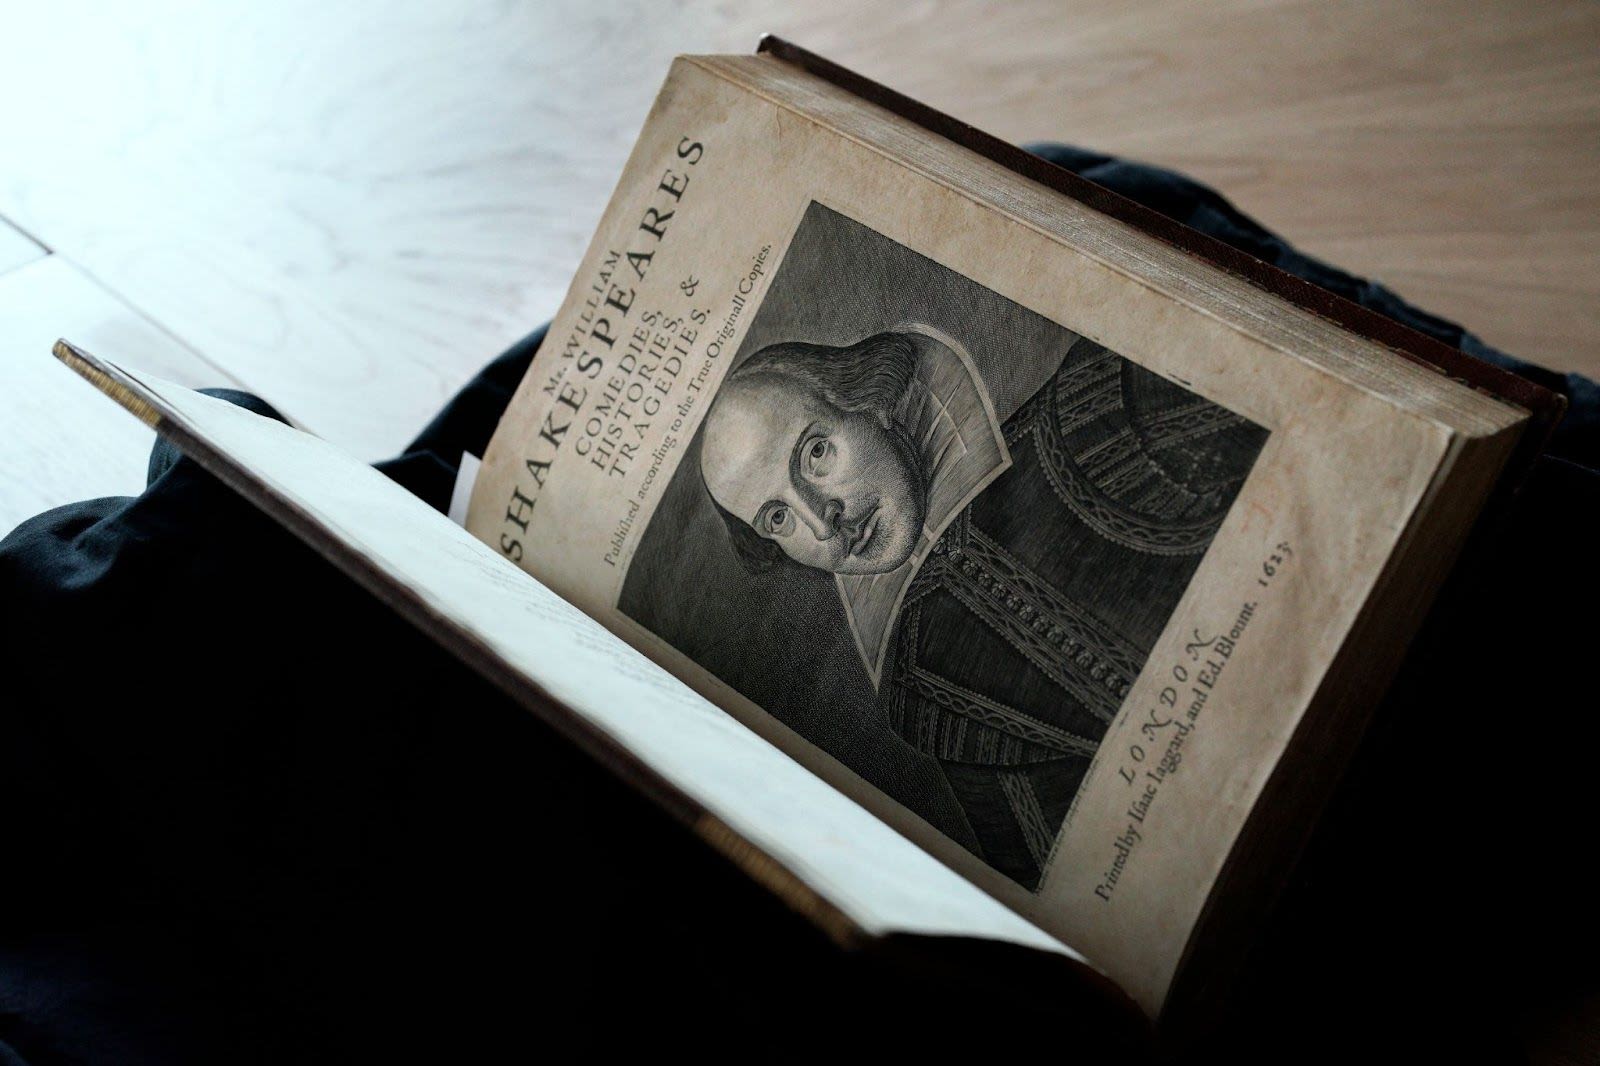 World's largest Shakespeare collection reopens after $80 million renovation